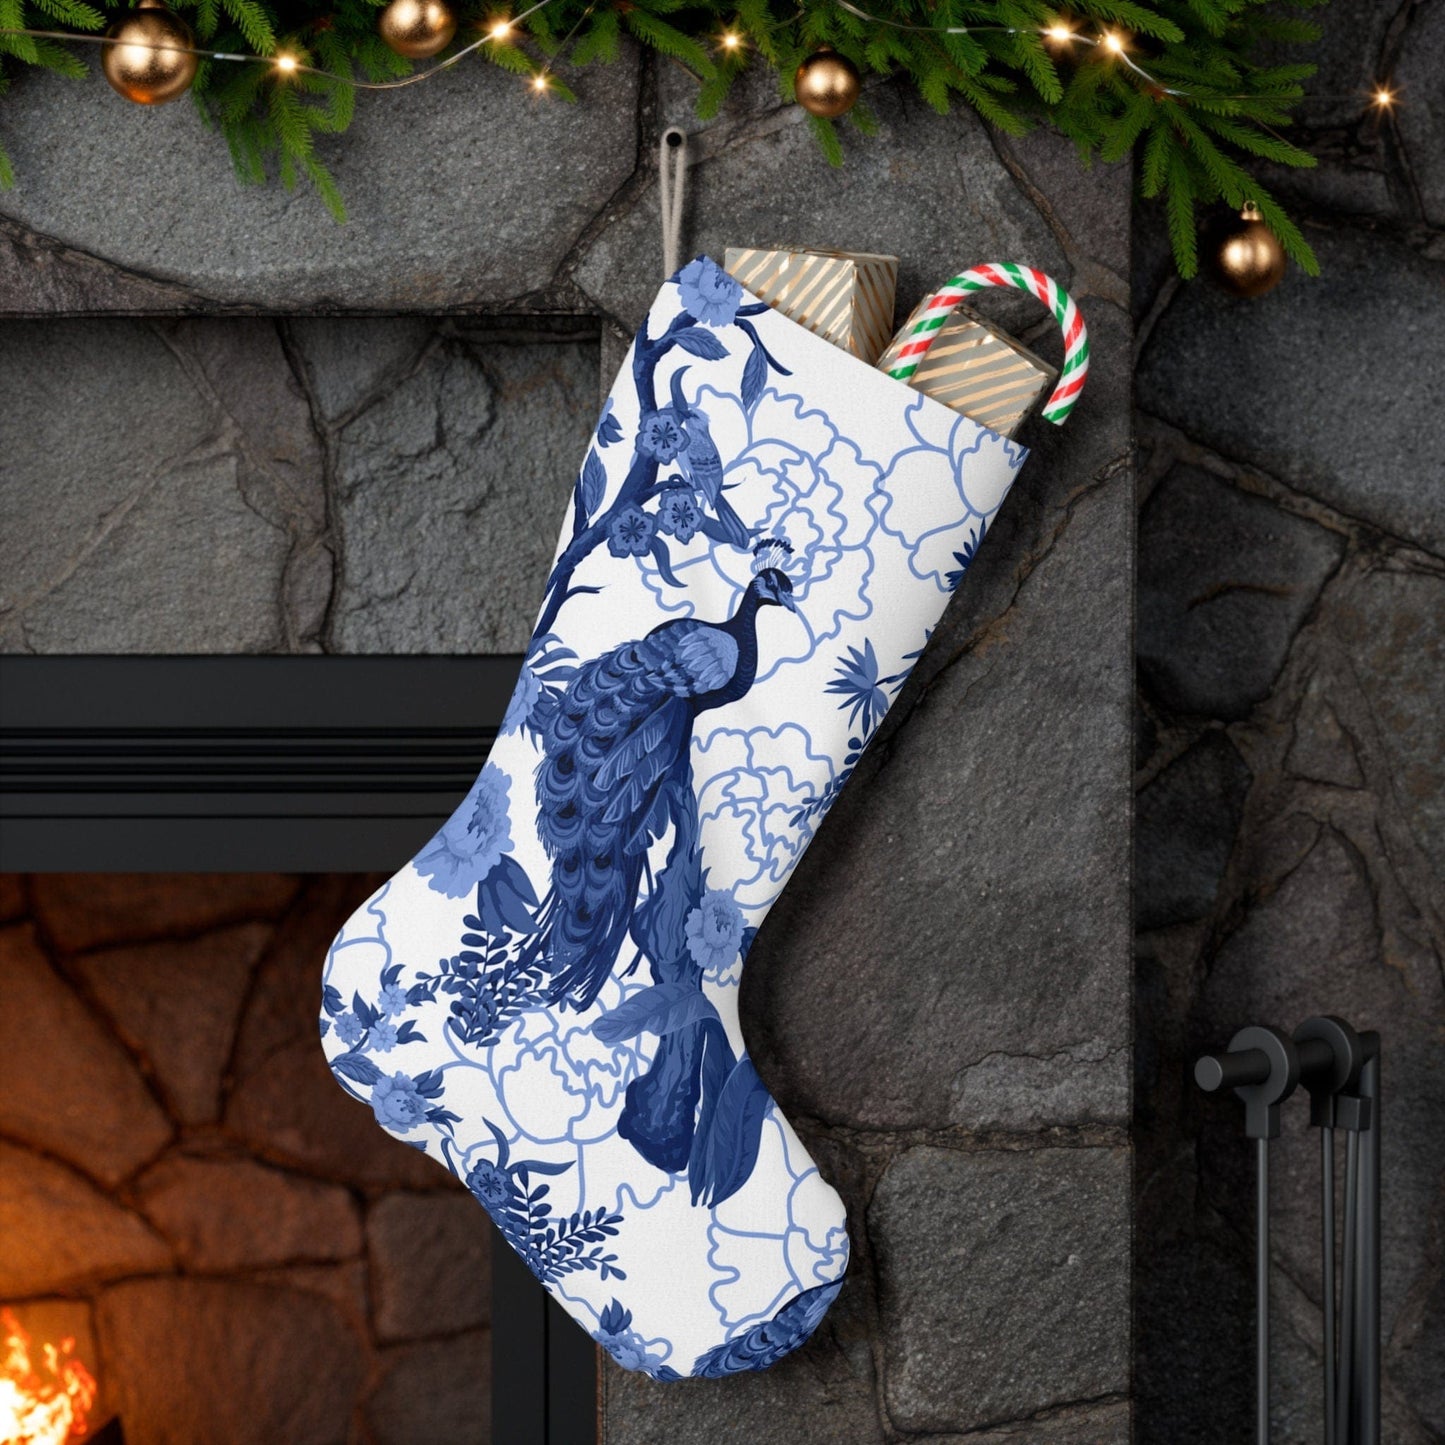 Kate McEnroe New York Chinoiserie Floral Peacock Holiday Stockings, Blue and White Botanical Toile Jungle Motifs Christmas Mantle Decoration Holiday Stockings 15899367389009277432